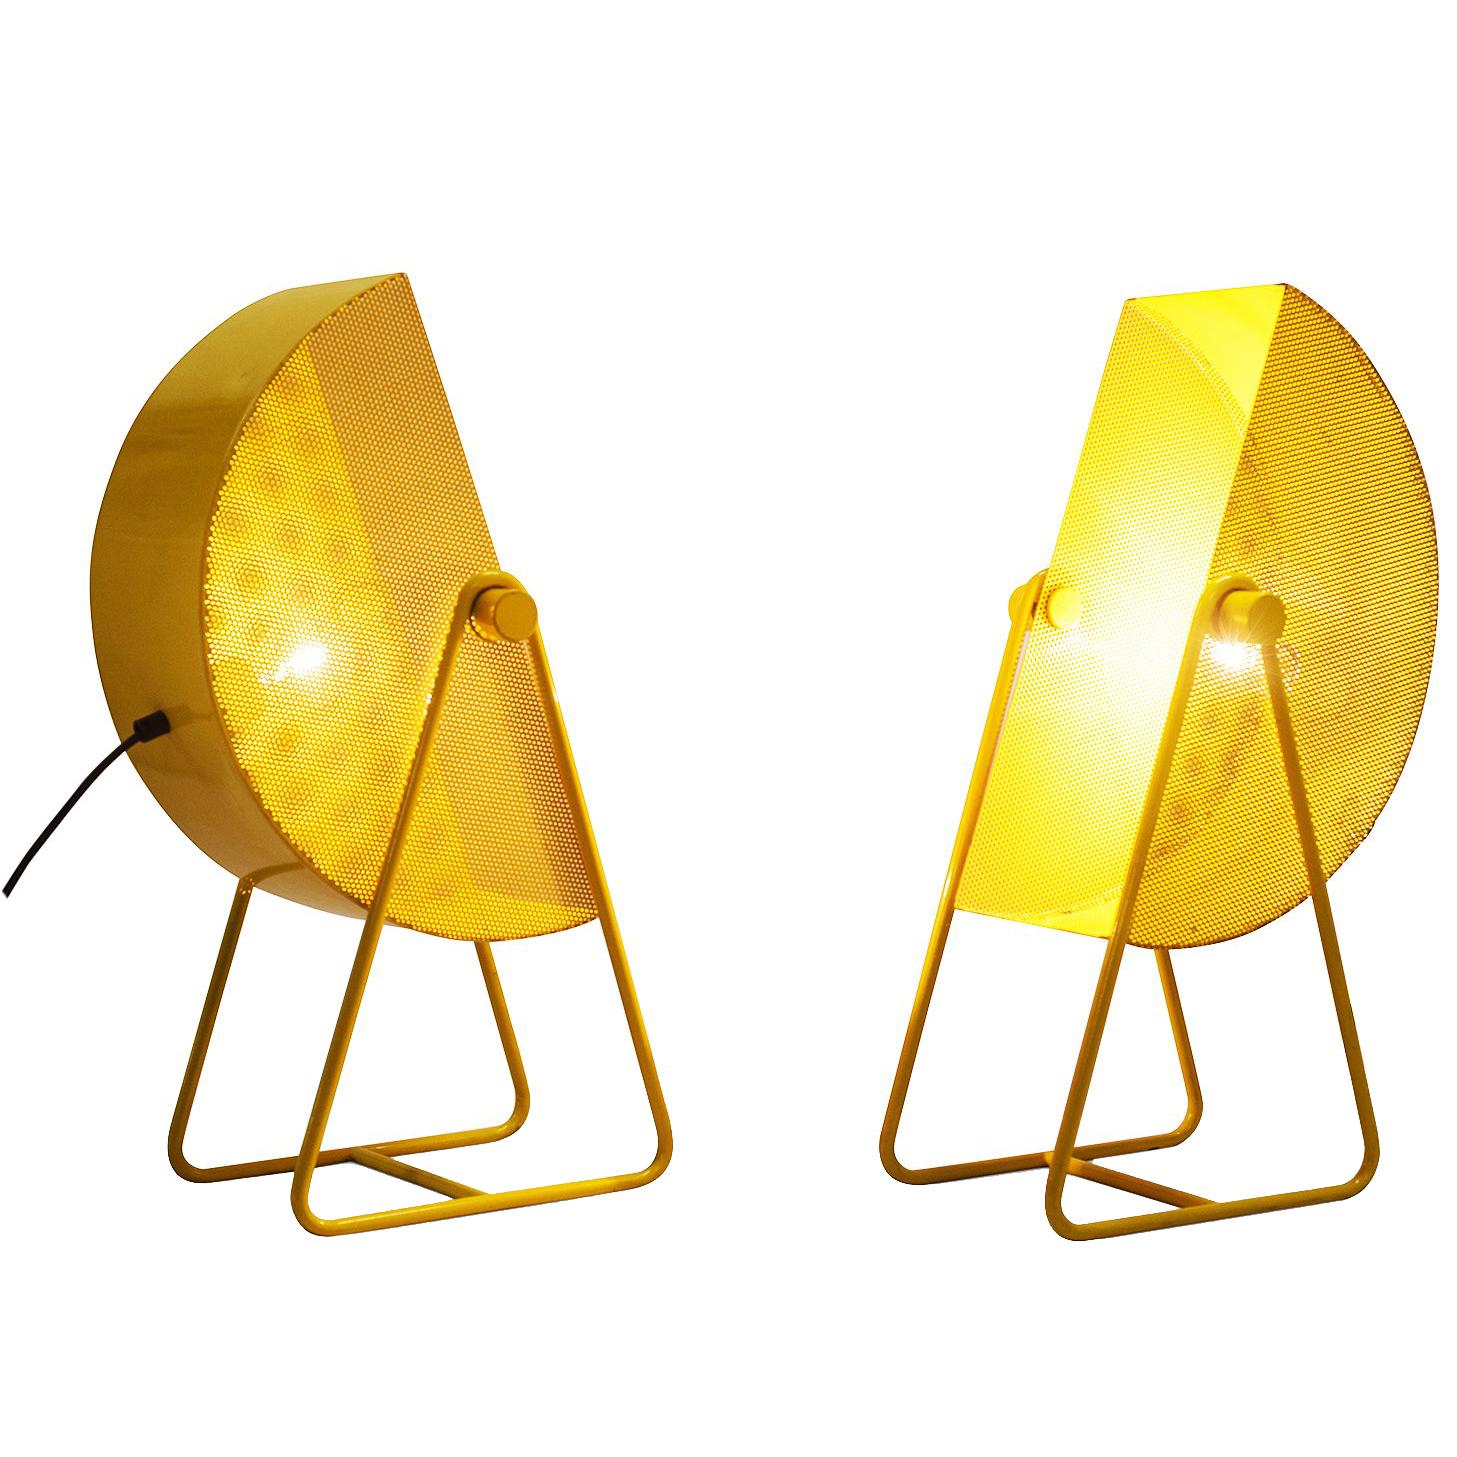 Postmodern Memphis style adjustable table lights in yellow coated metal. 
The shades are perforated and create a nice light partition. 
The lamps have a very contemporary appearance due the sharp lines and geometrical shapes.

Measures: W 25, D